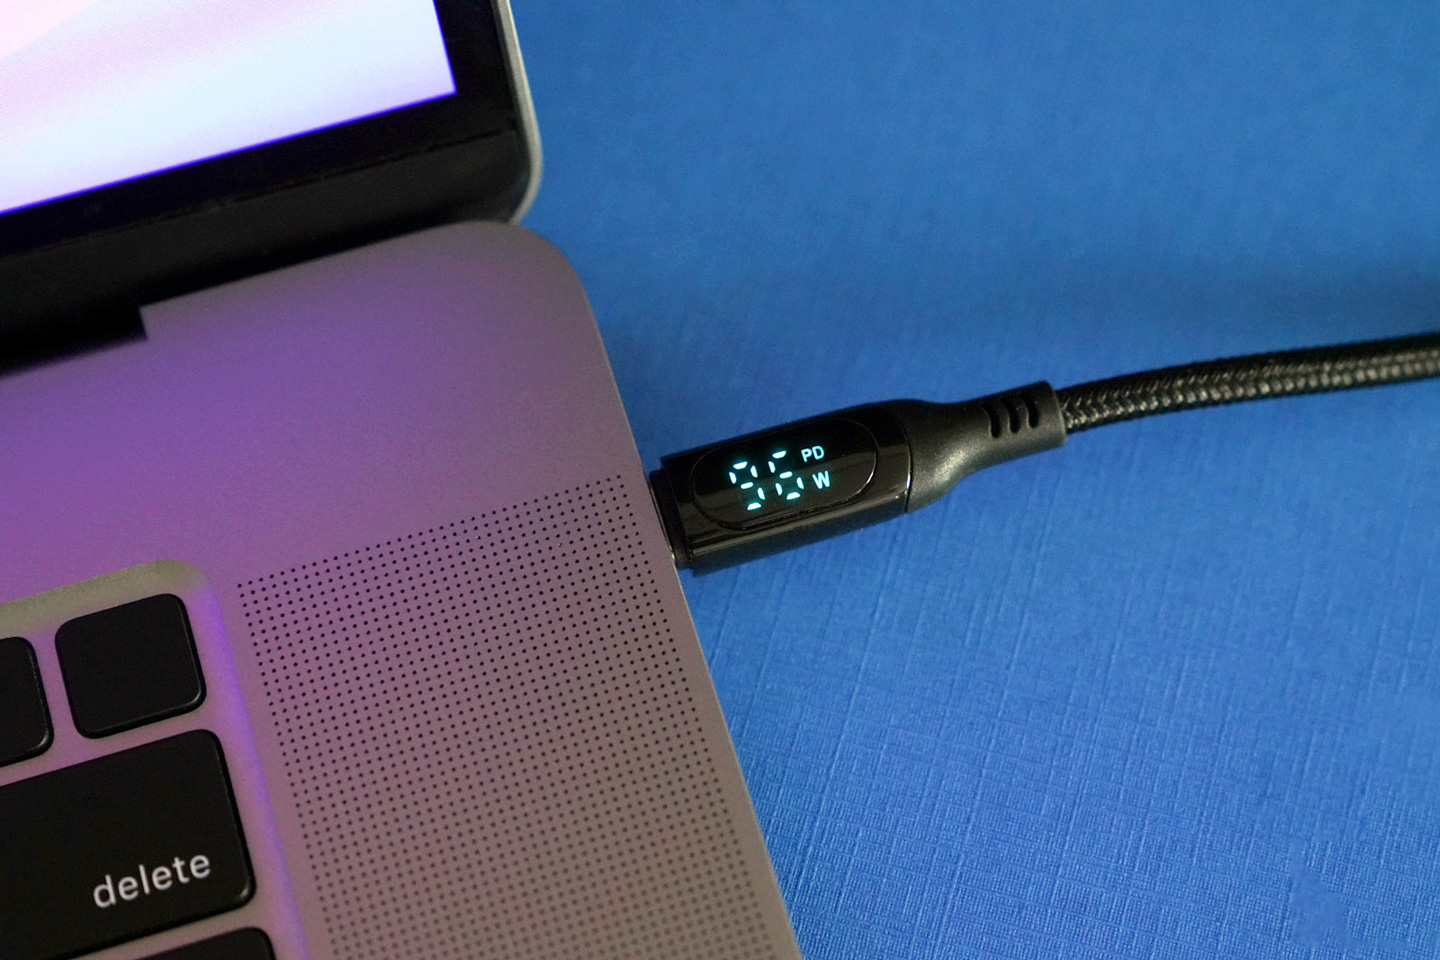 #USB-C cable with built-in LED Display lets you see your device’s power consumption in real-time